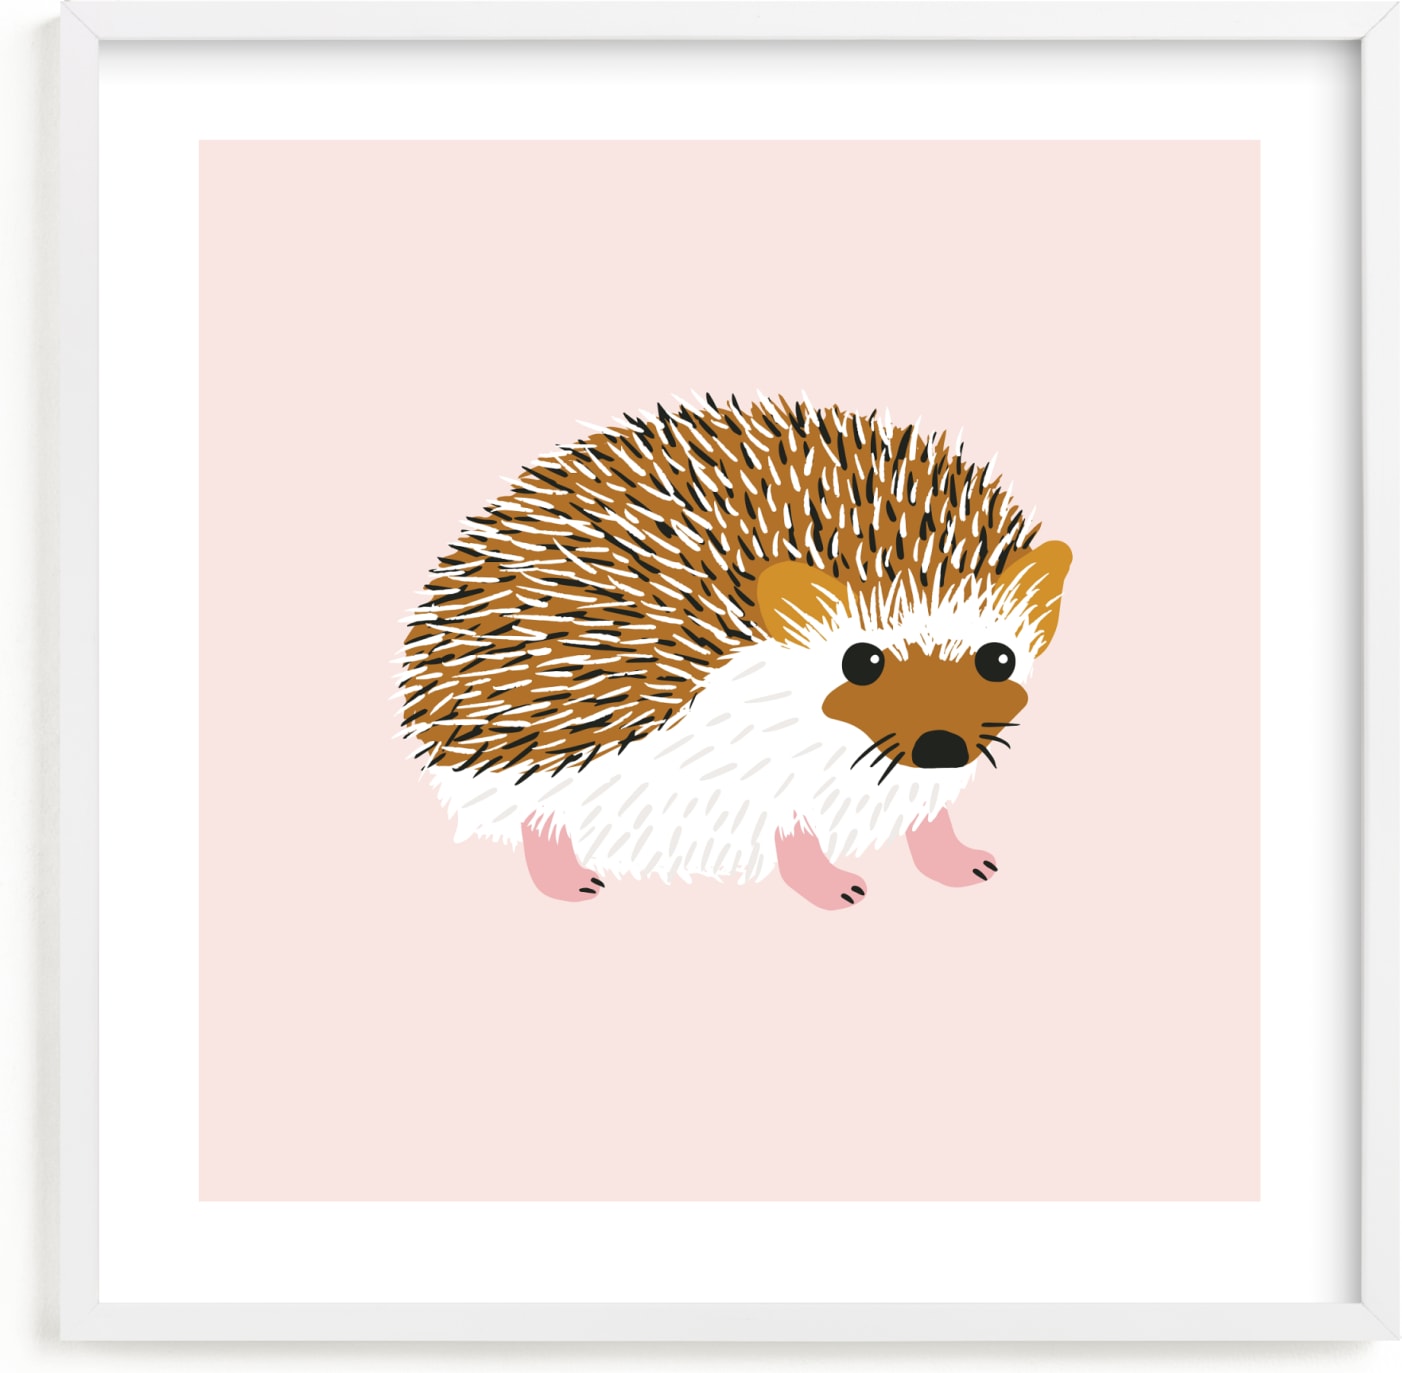 This is a brown kids wall art by Genna Blackburn called Little Hedgehog.